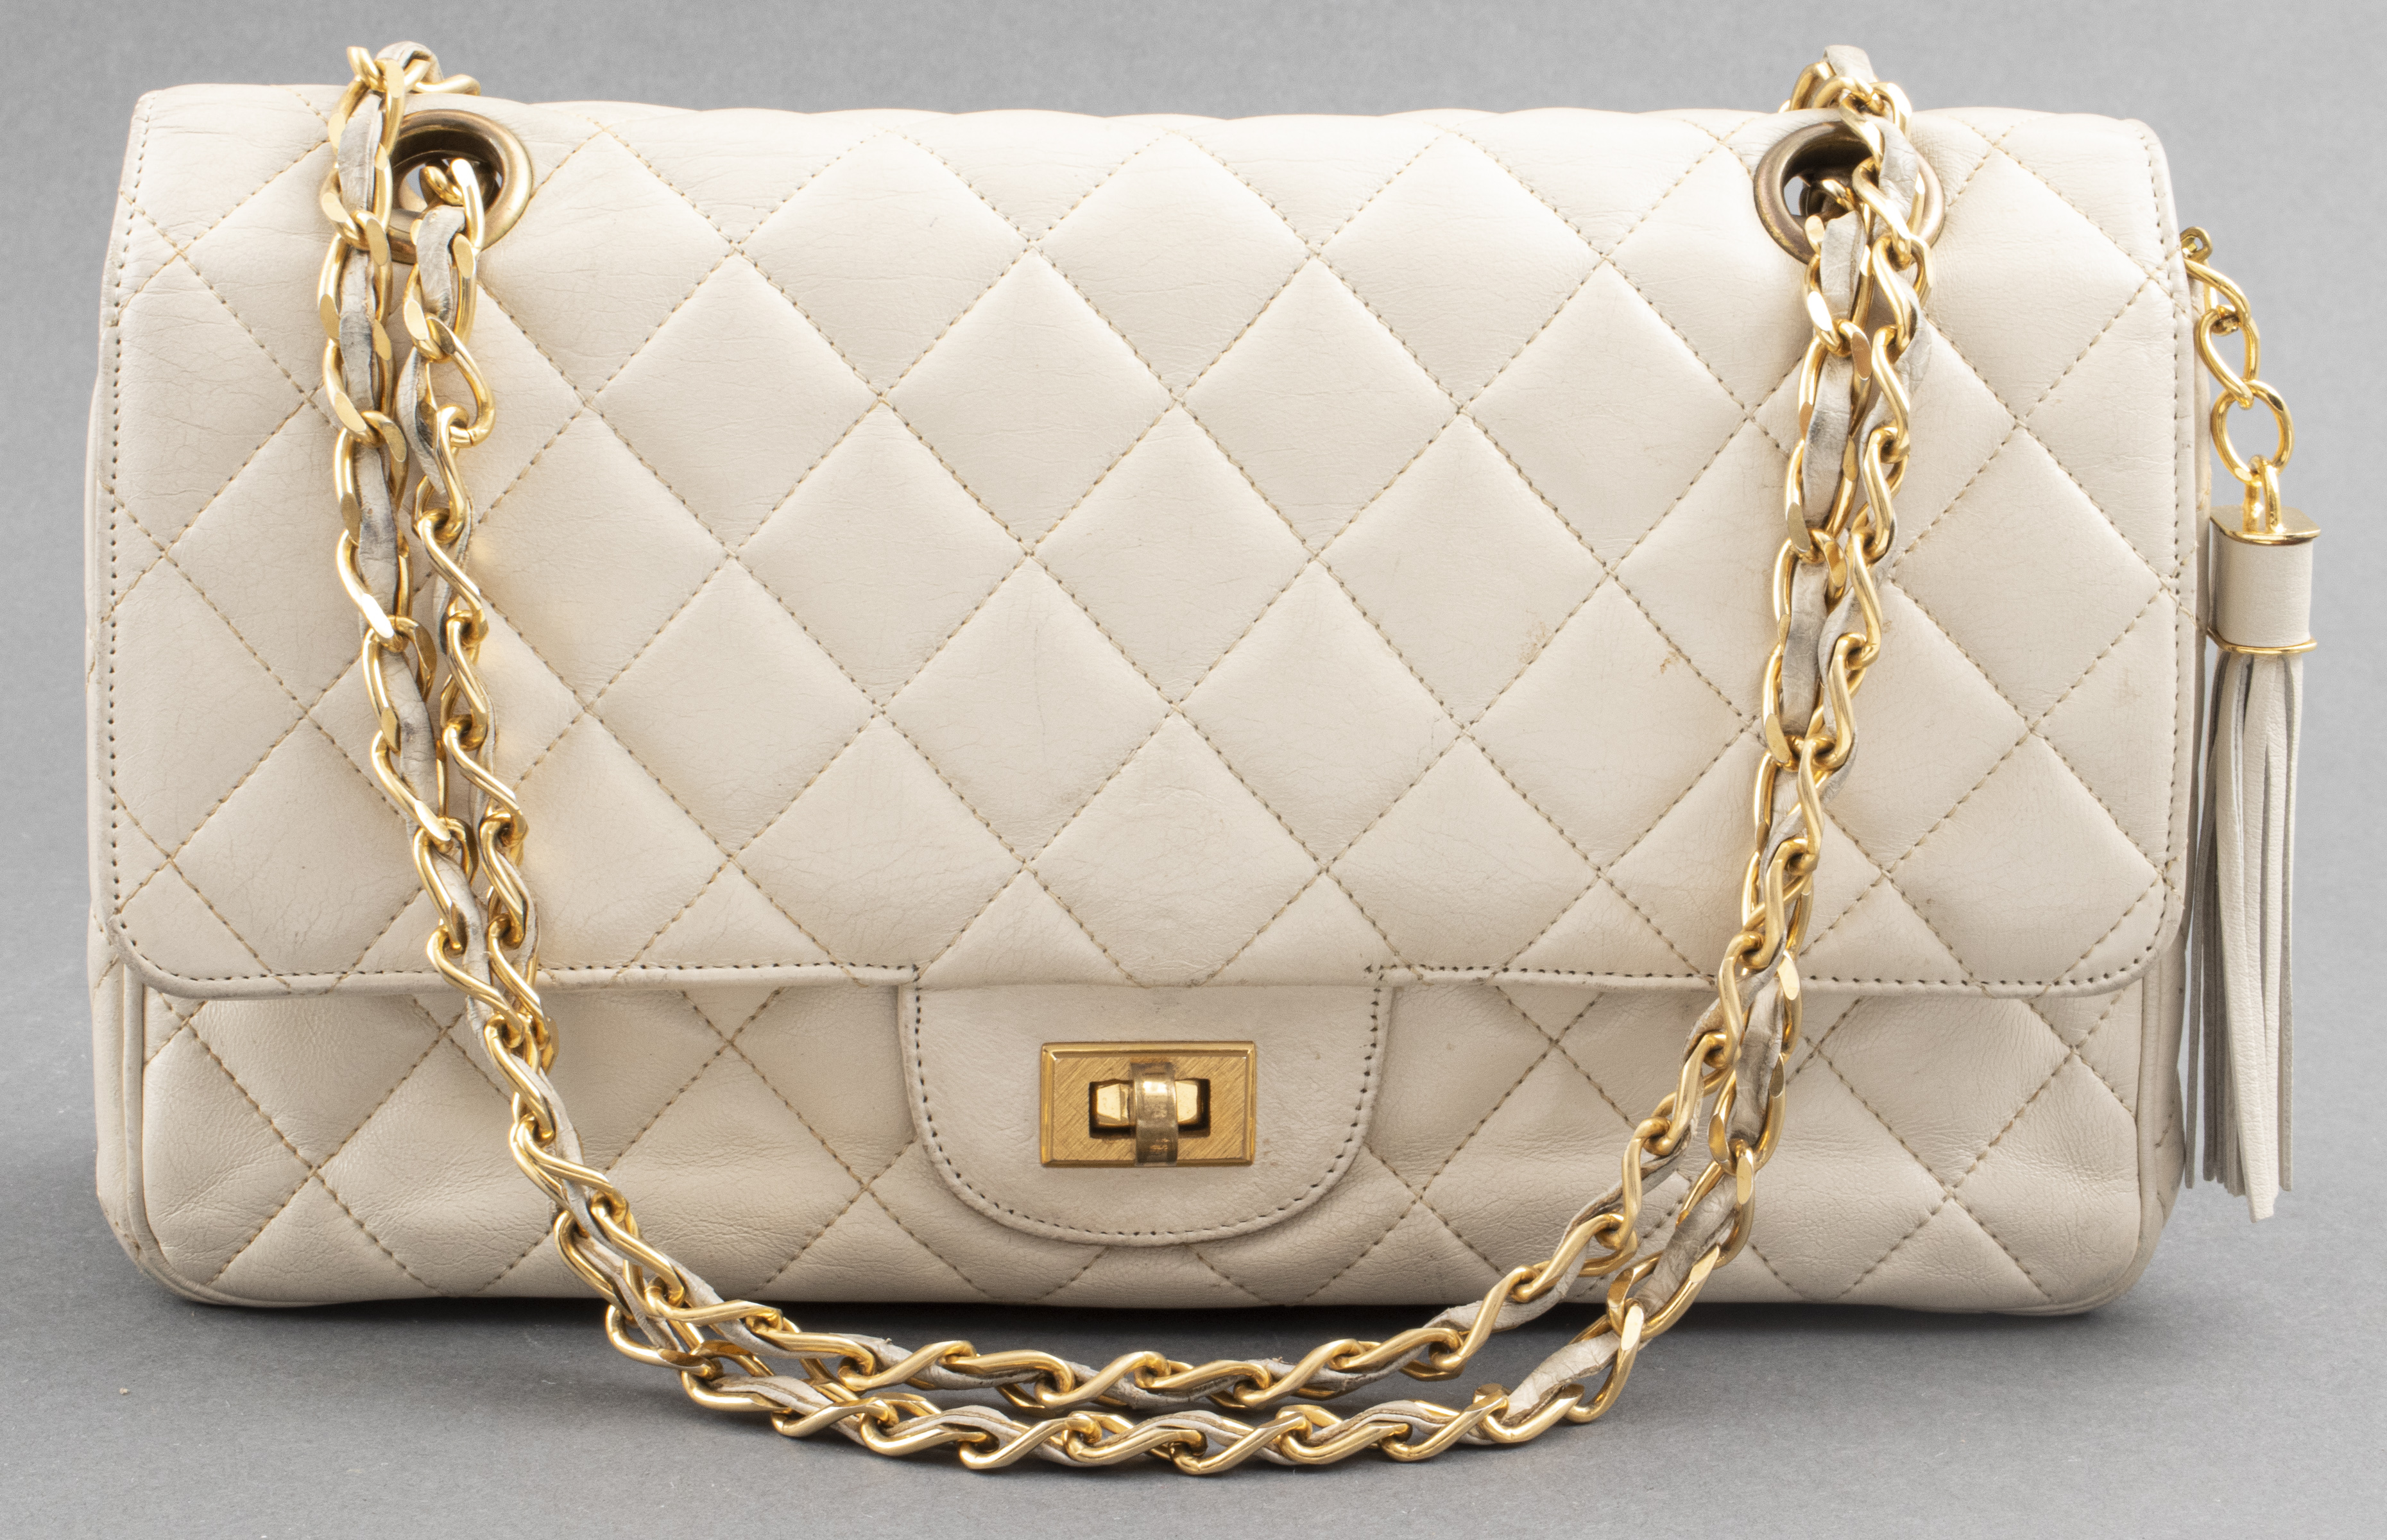 BEIGE QUILTED LEATHER 2 55 STYLE 3c485f